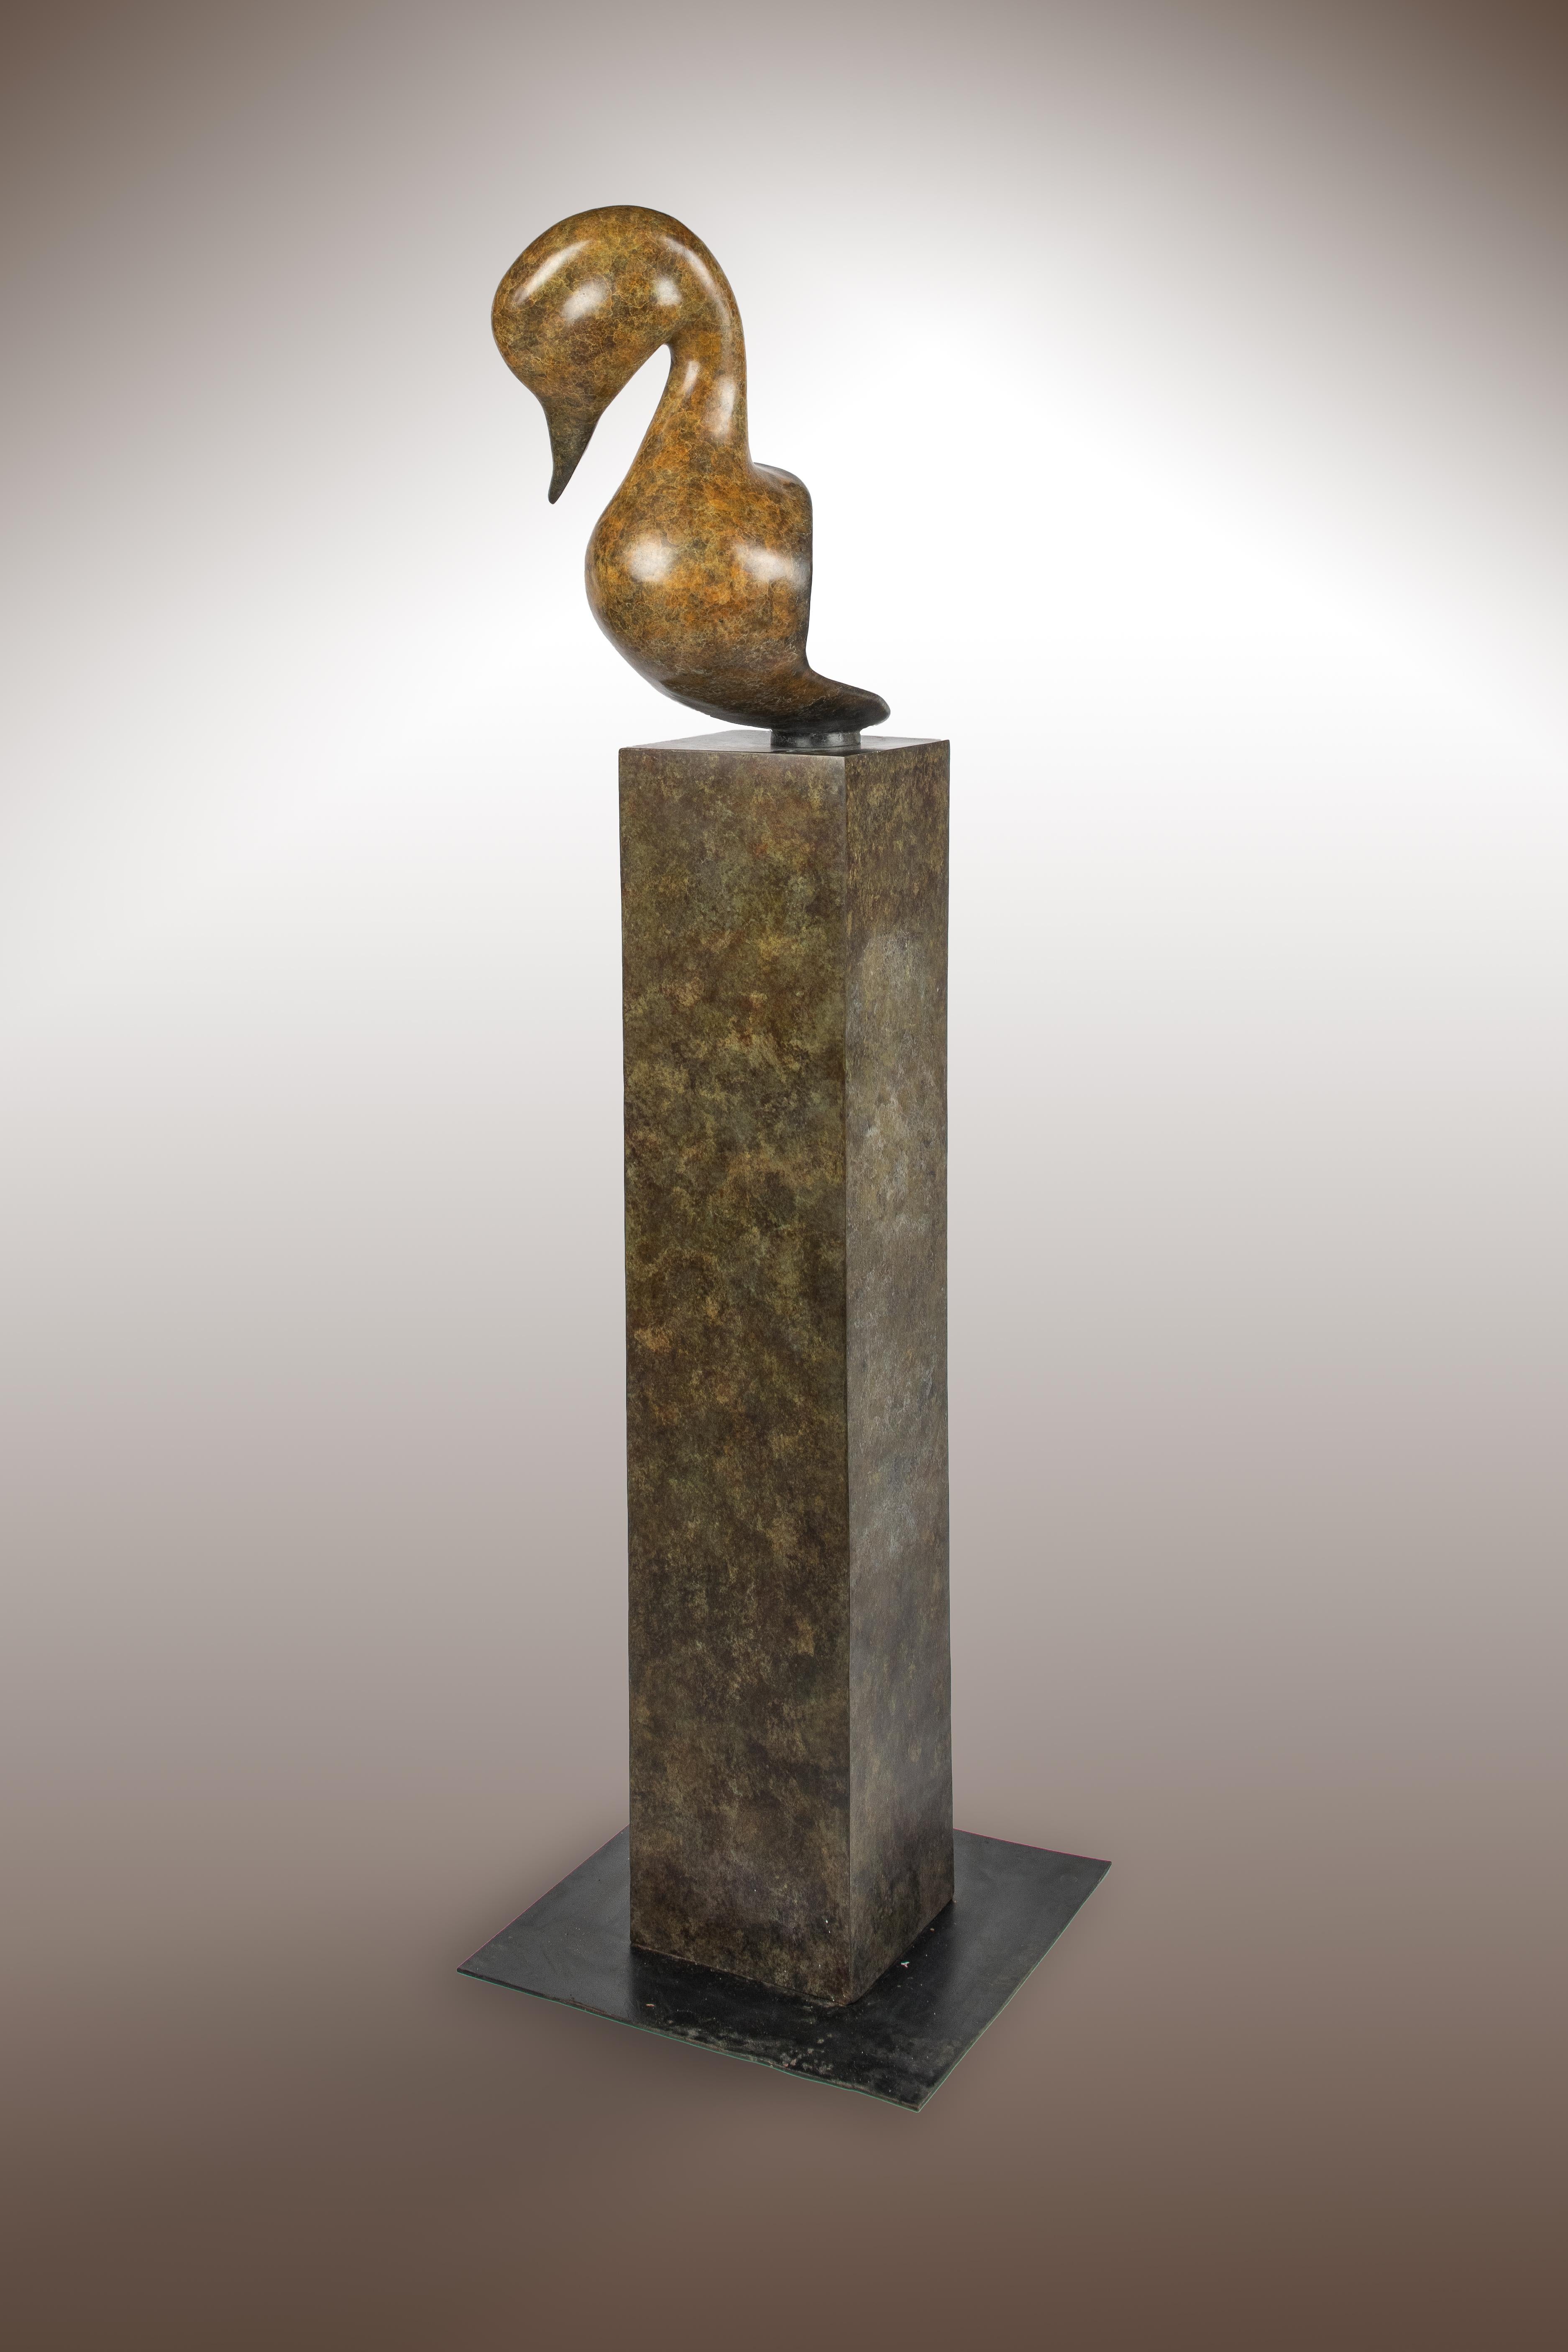 Contemporary large Bronze Wildlife Sculpture 'Pintail Head' by Richard Smith  - Gold Figurative Sculpture by Richard Smith b.1955